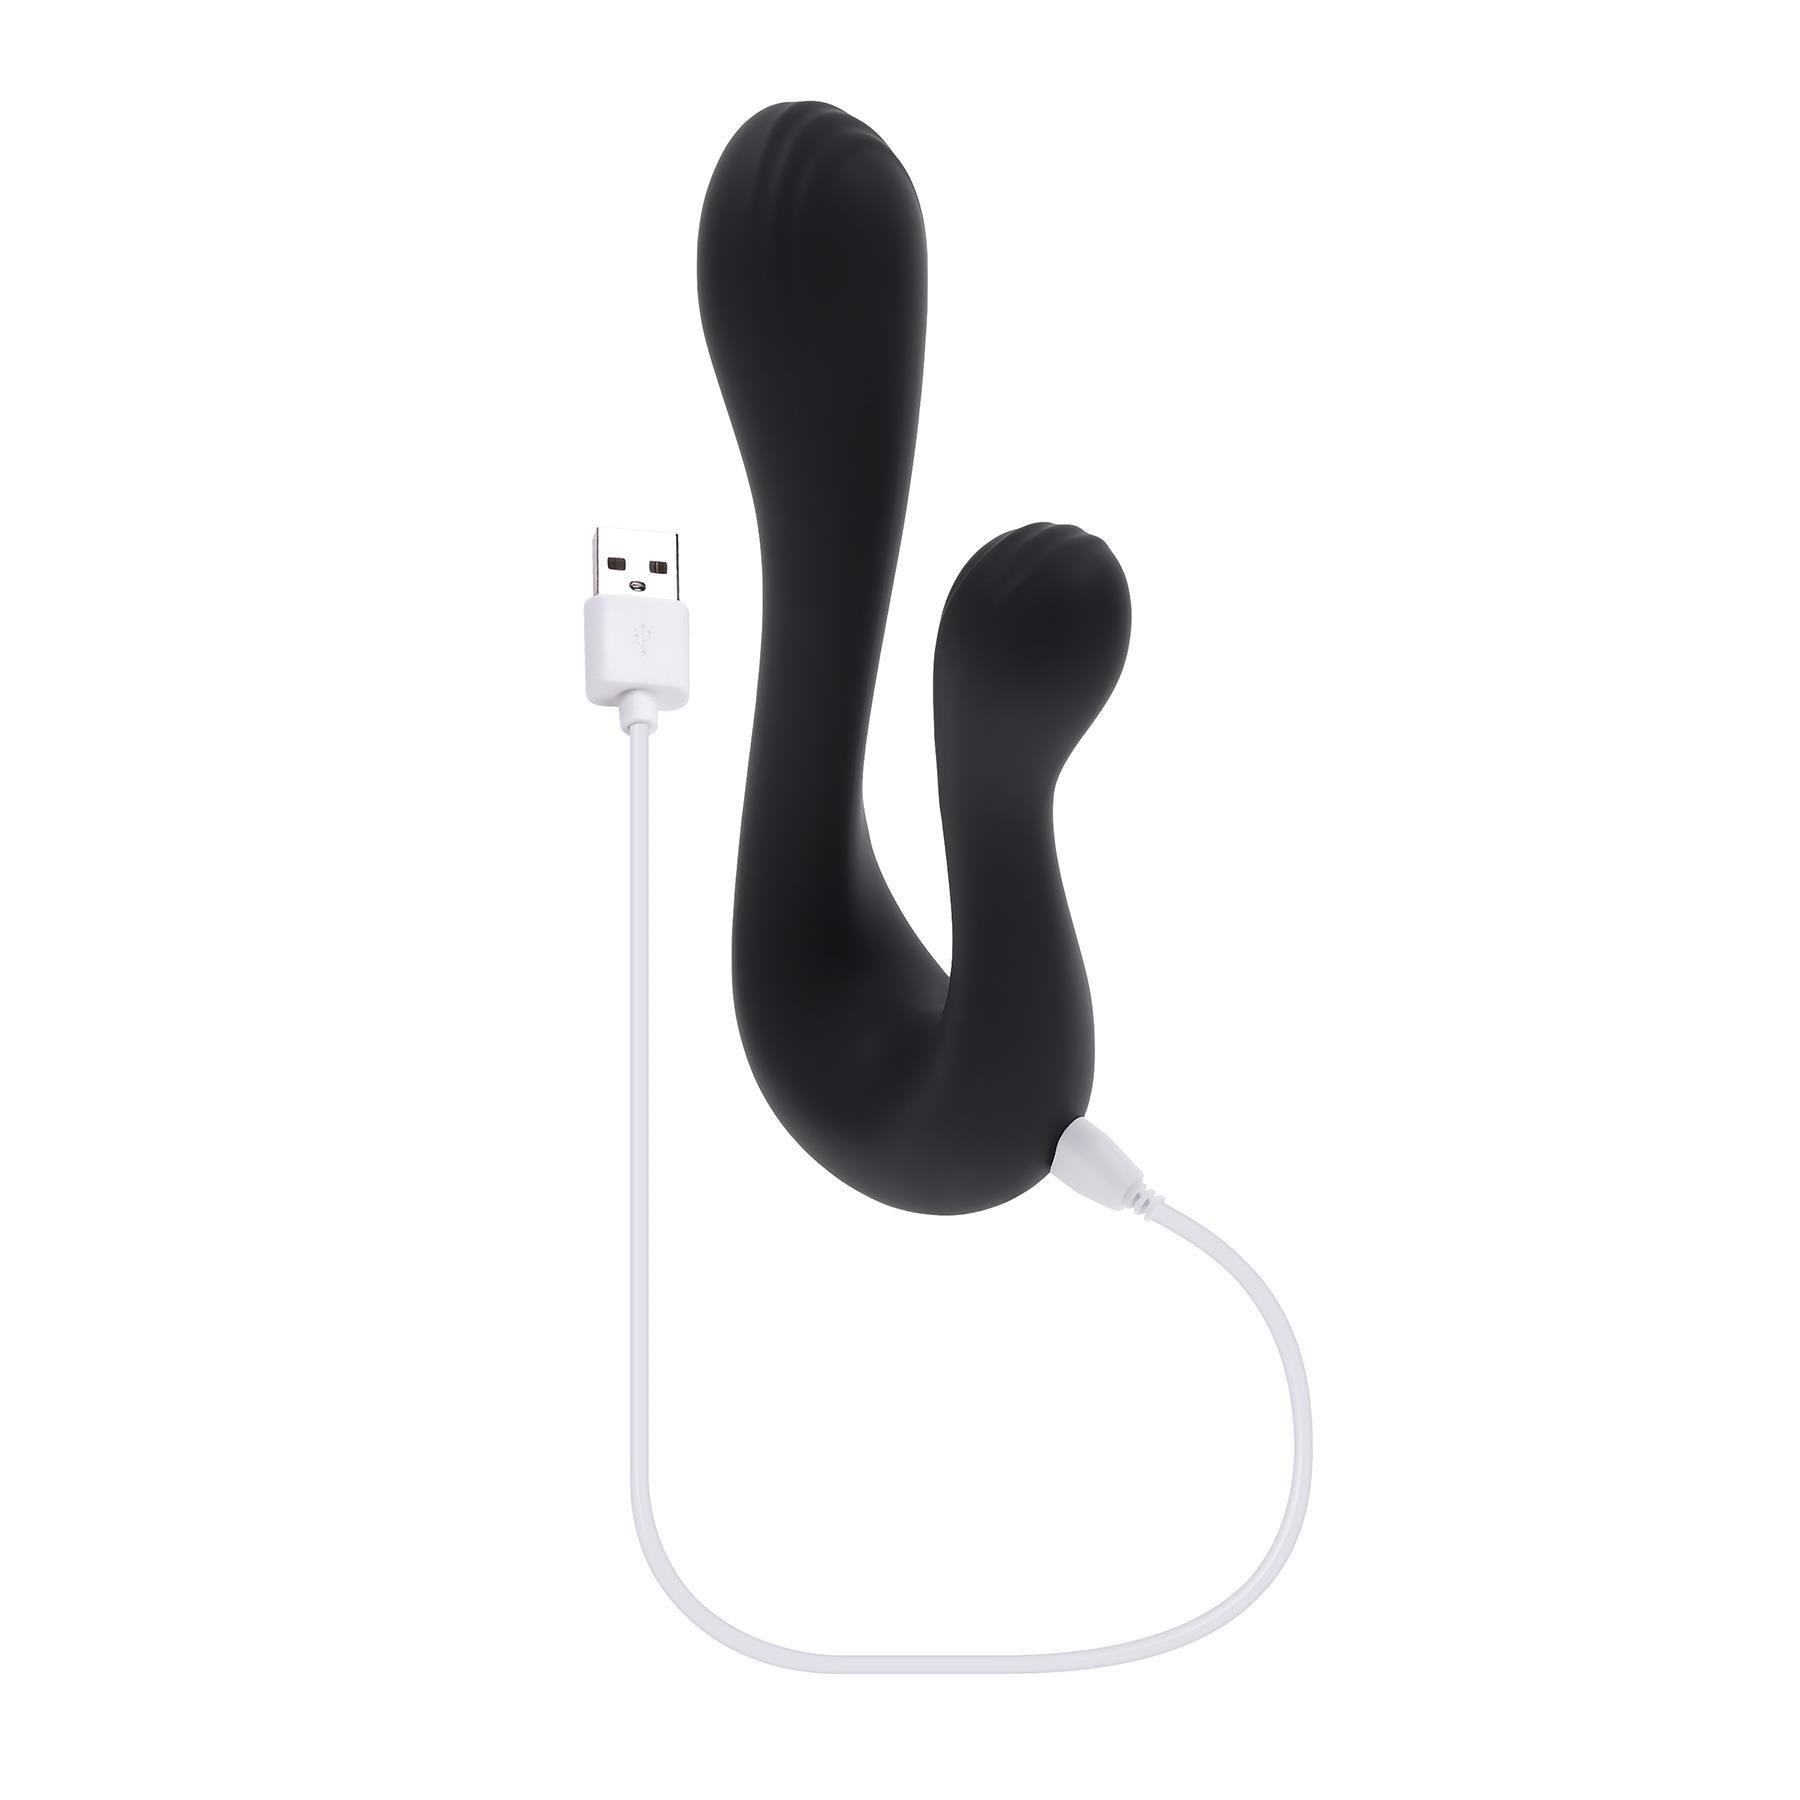 Playboy Pleasure The Swan Multi-Play Vibrator - Product Shot With Charging Cable